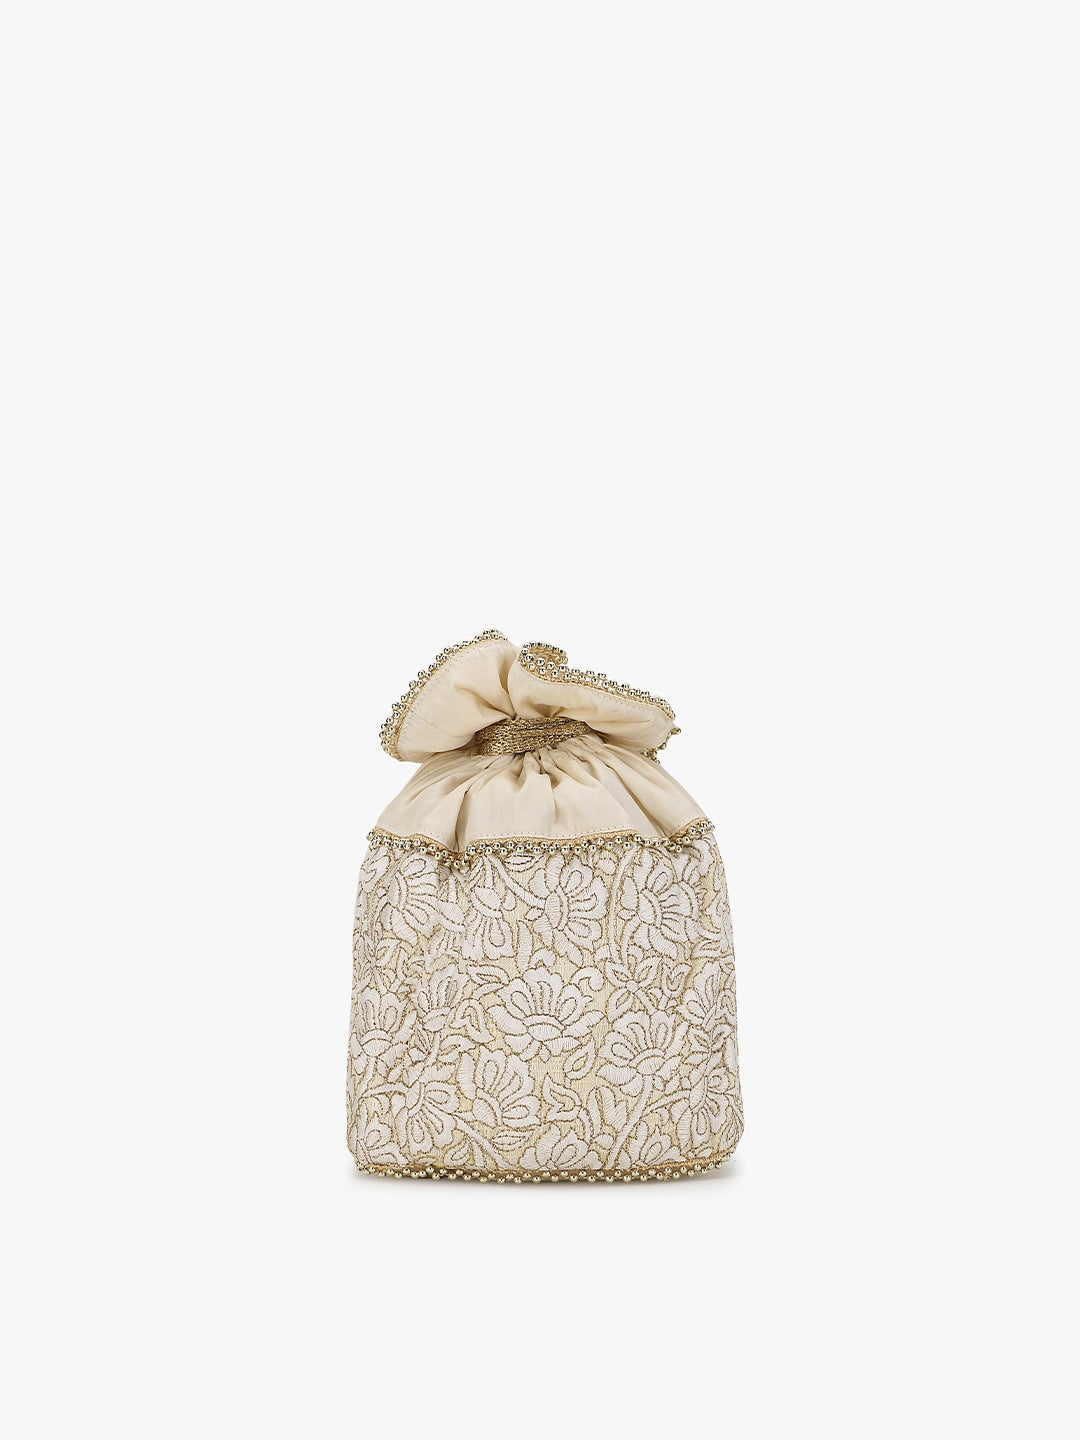 Cream-Coloured & Gold-Toned Embroidered Tasselled Potli Clutch